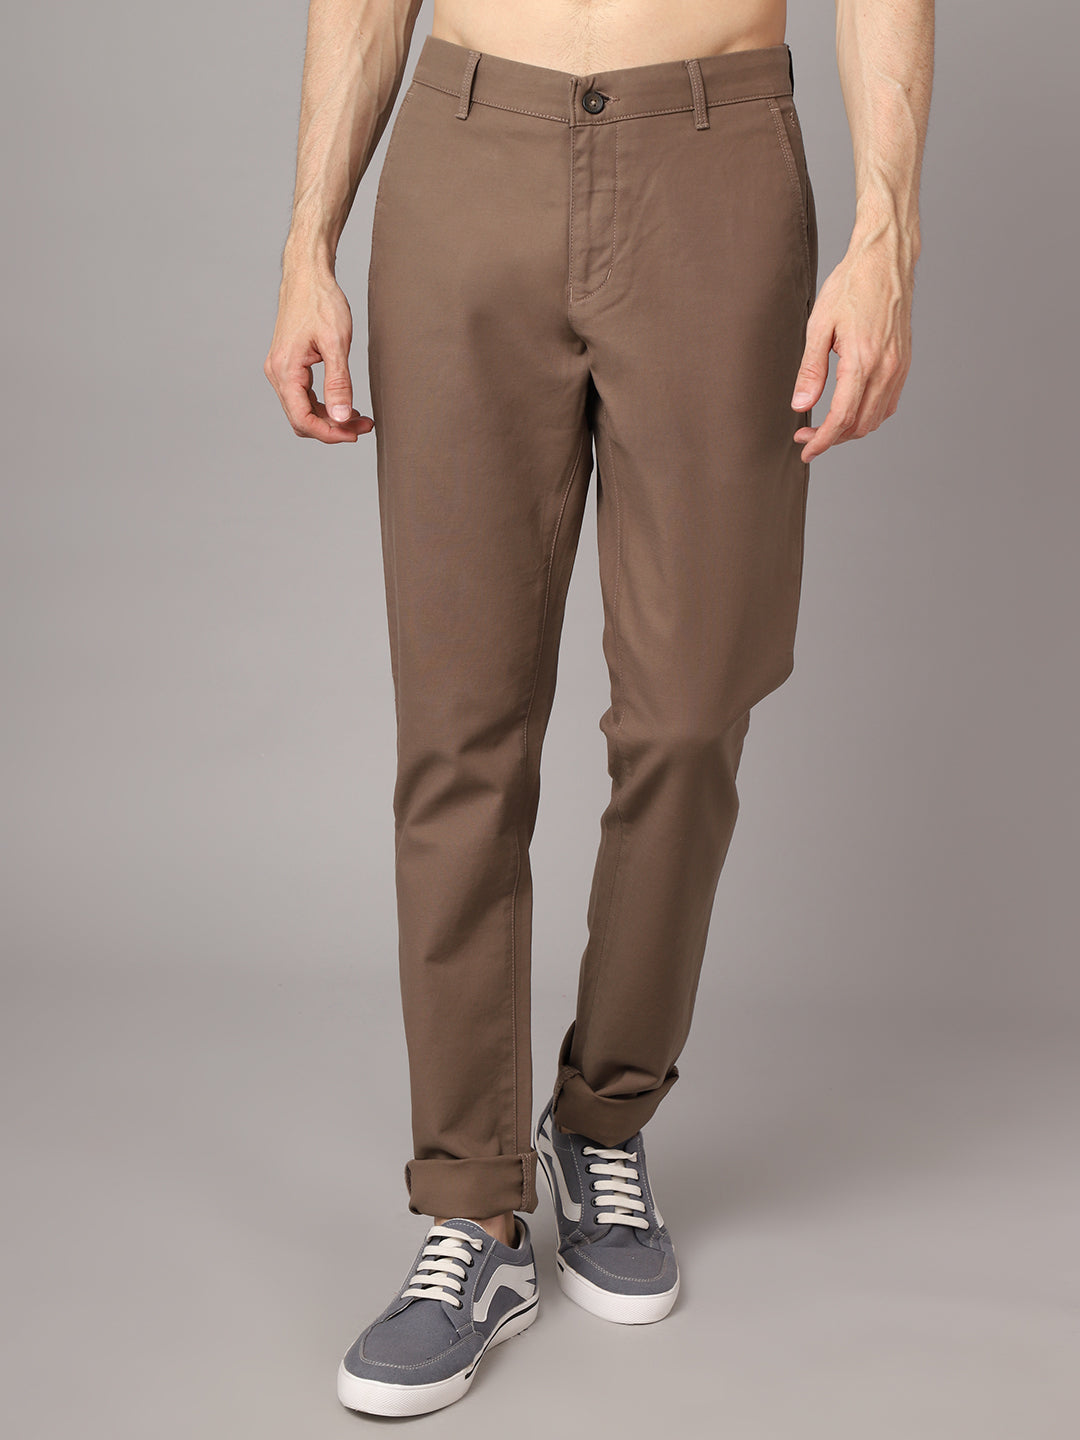 Cantabil Beige Cotton Regular Fit Trousers